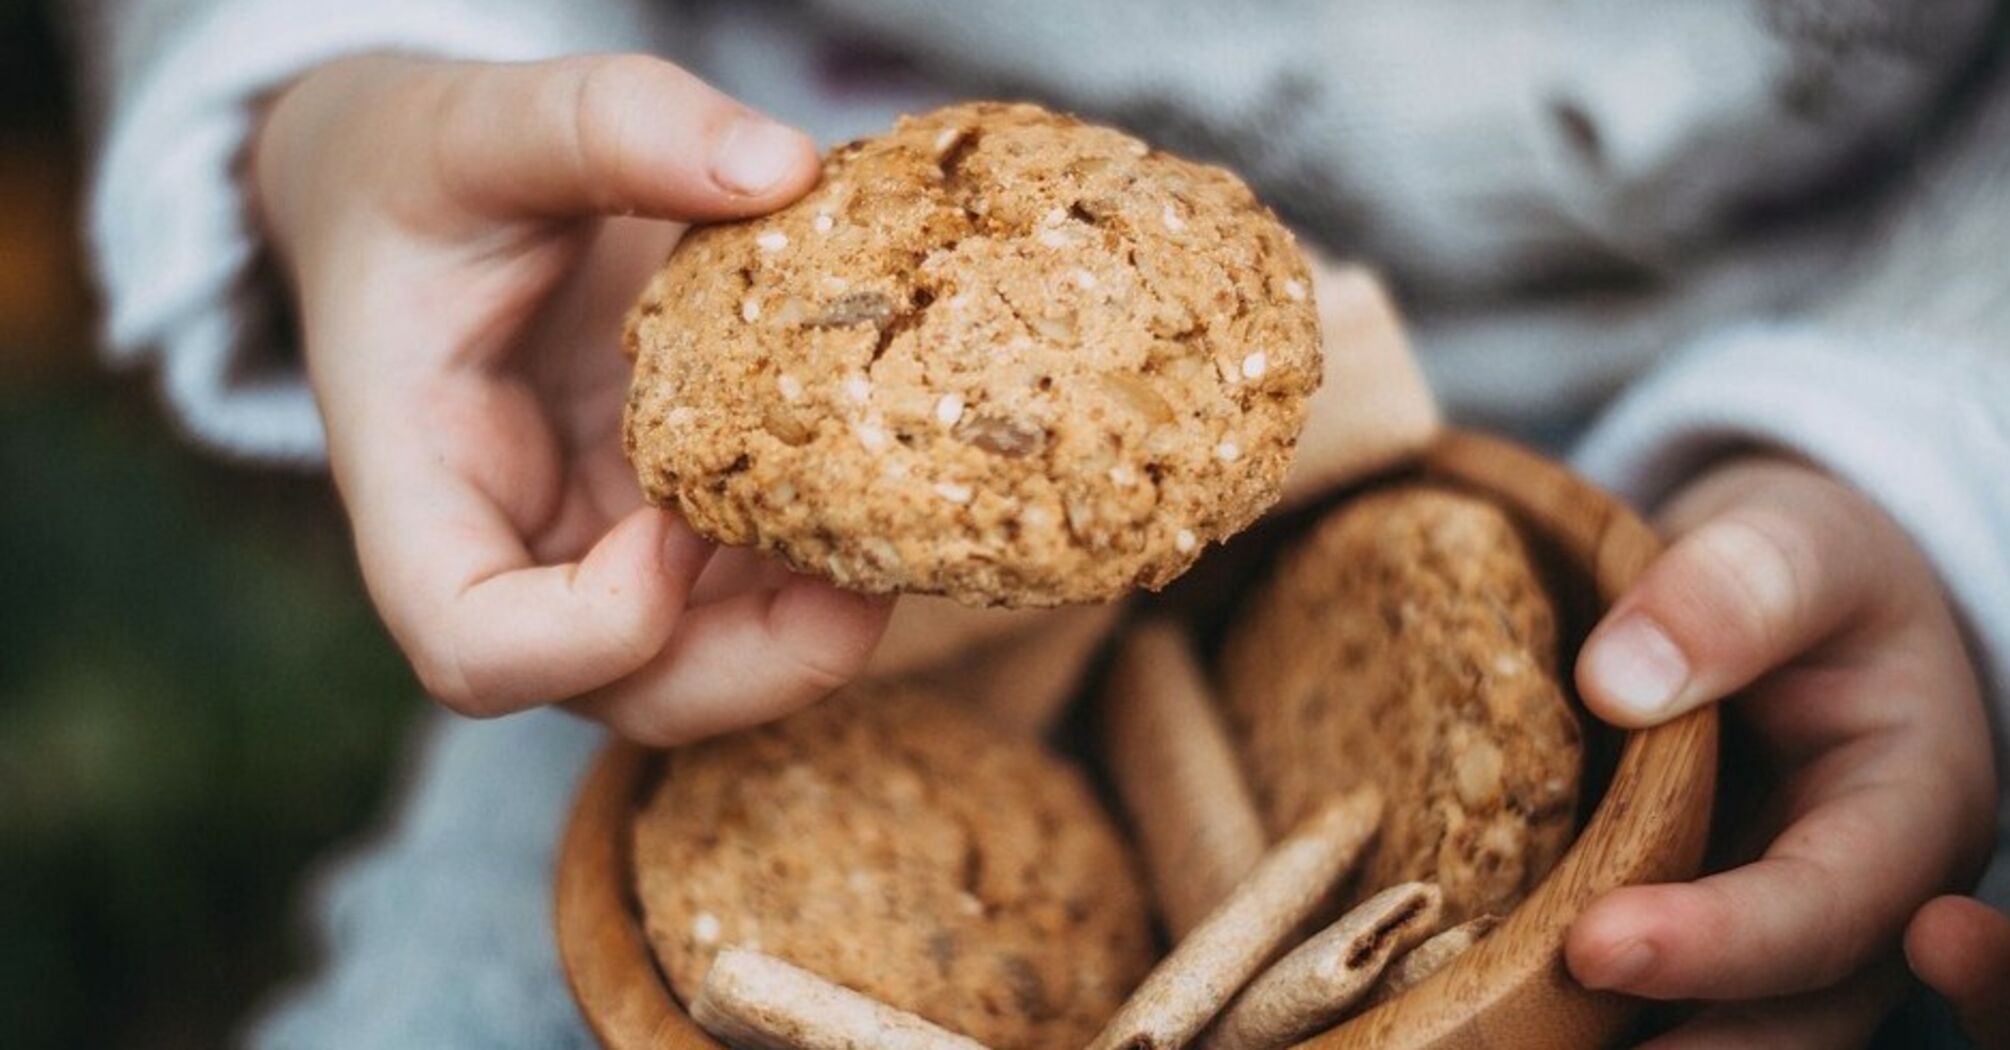 'Four Cereal' cookies: the simplest homemade baking